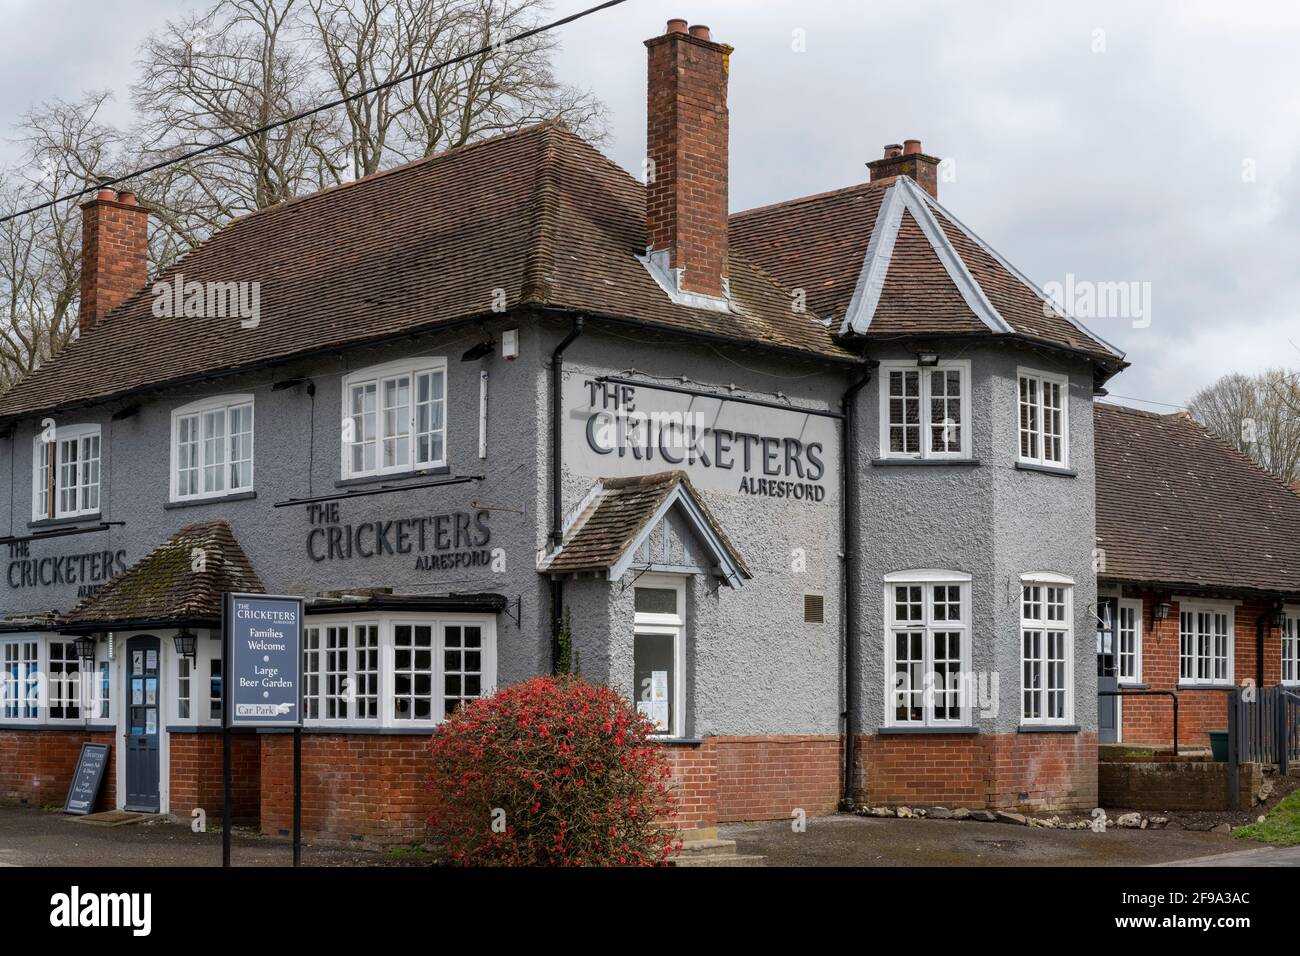 The Cricketers public House, Jacklyns Lane, Alresford, Hampshire, Angleterre, ROYAUME-UNI Banque D'Images